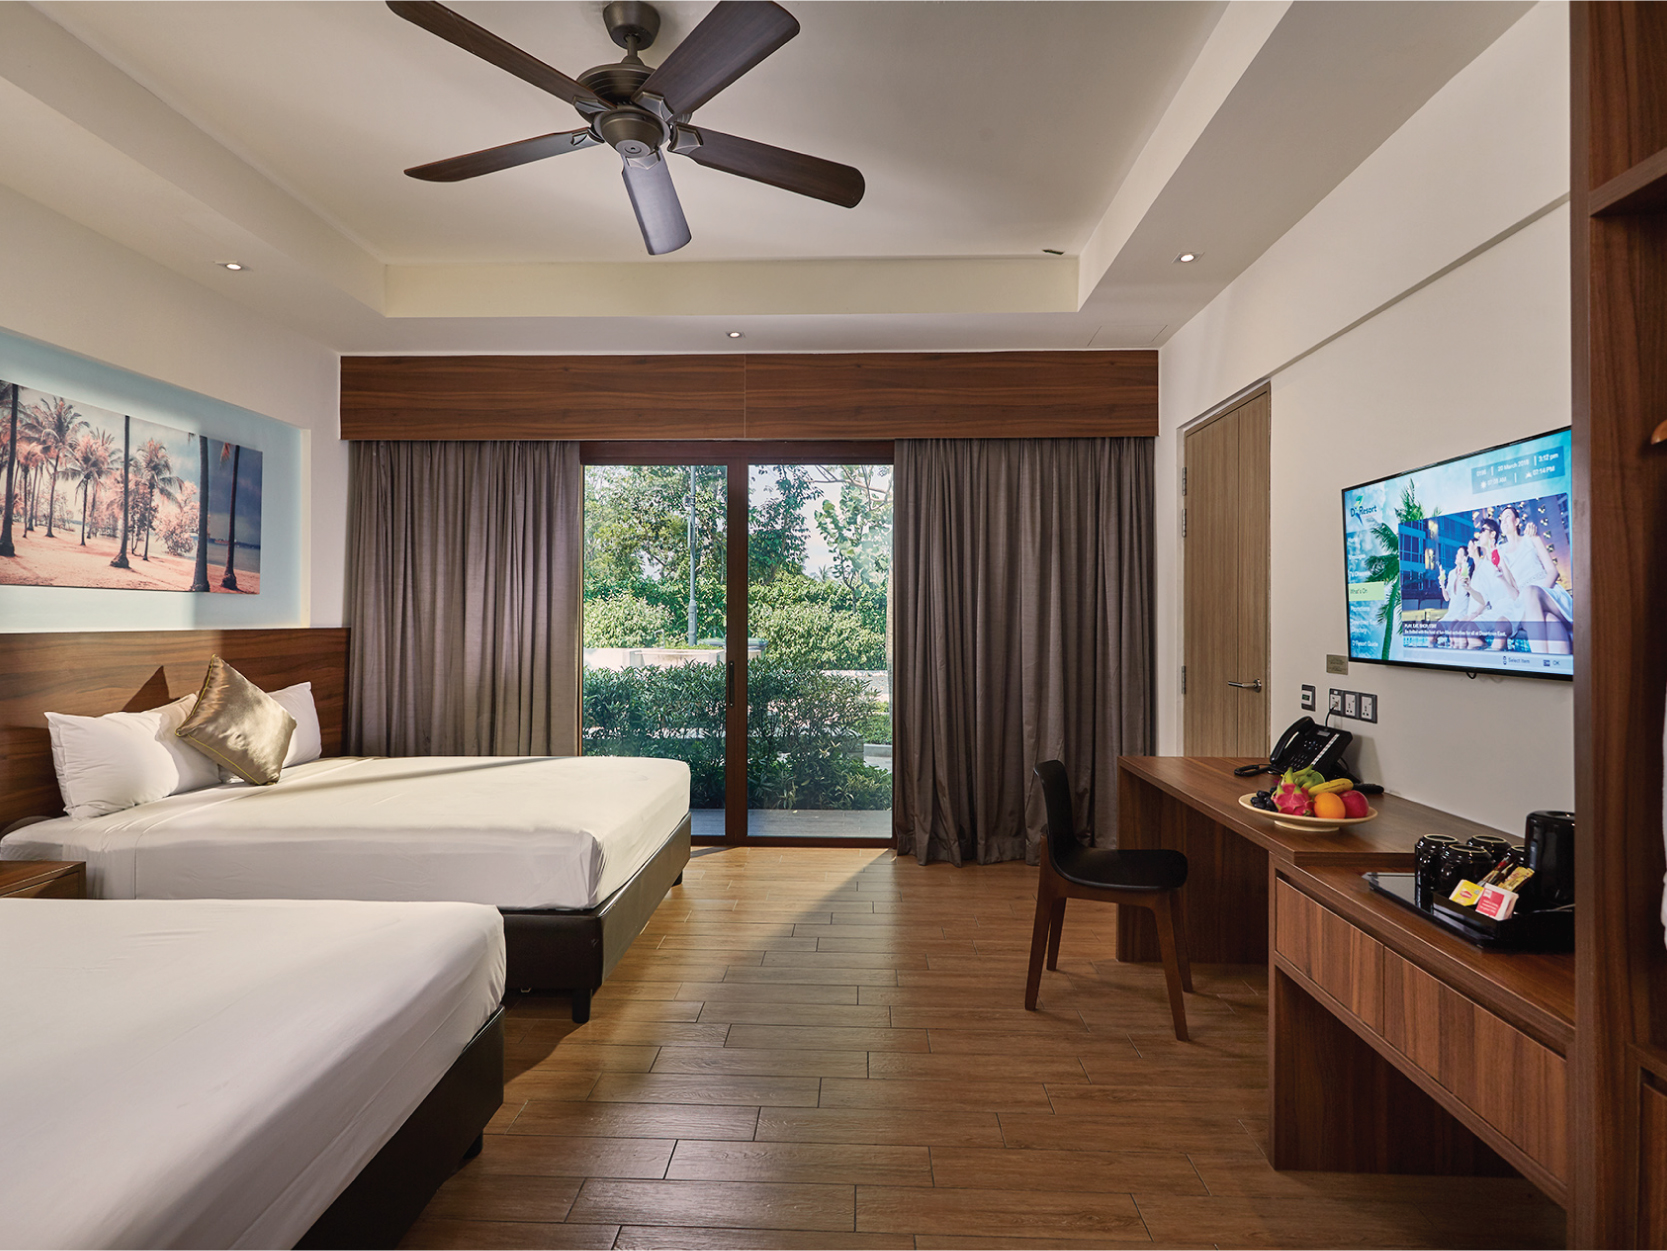 Beach Cove - Rooms for staycation with family and friends at D'Resort Singapore